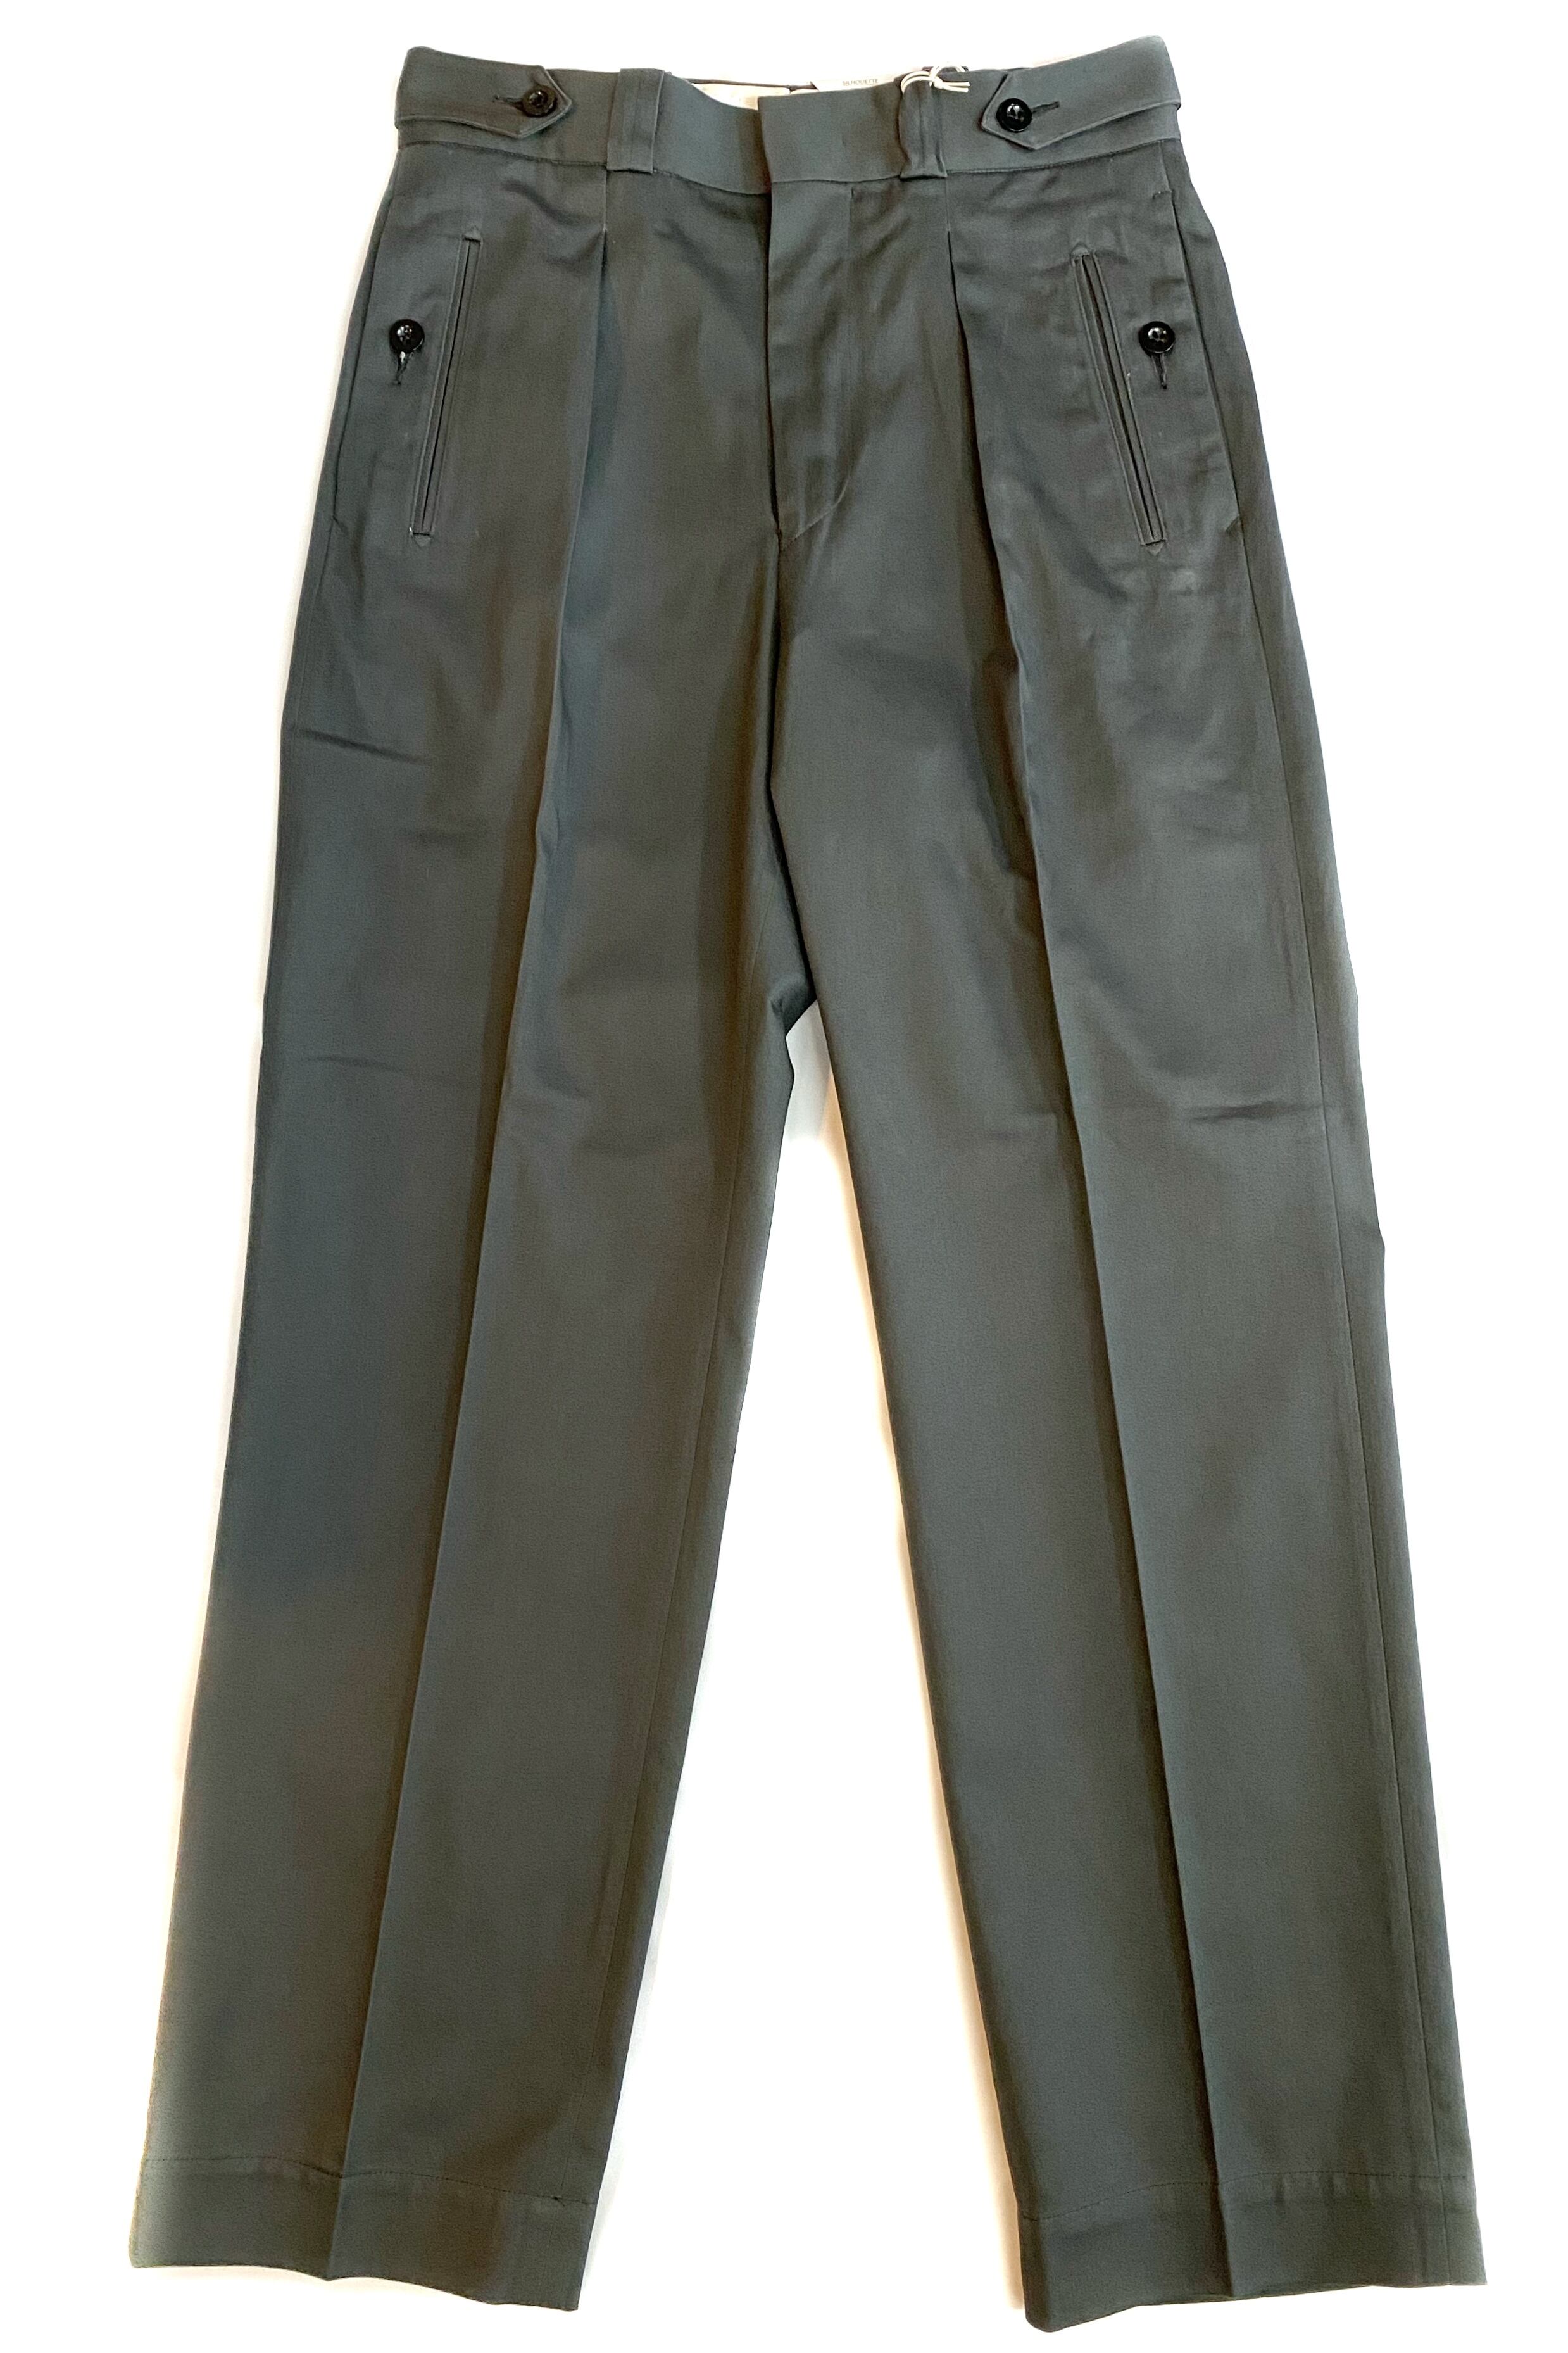 Tangent / Tan04 French Army Adjuster Pants バックサテン